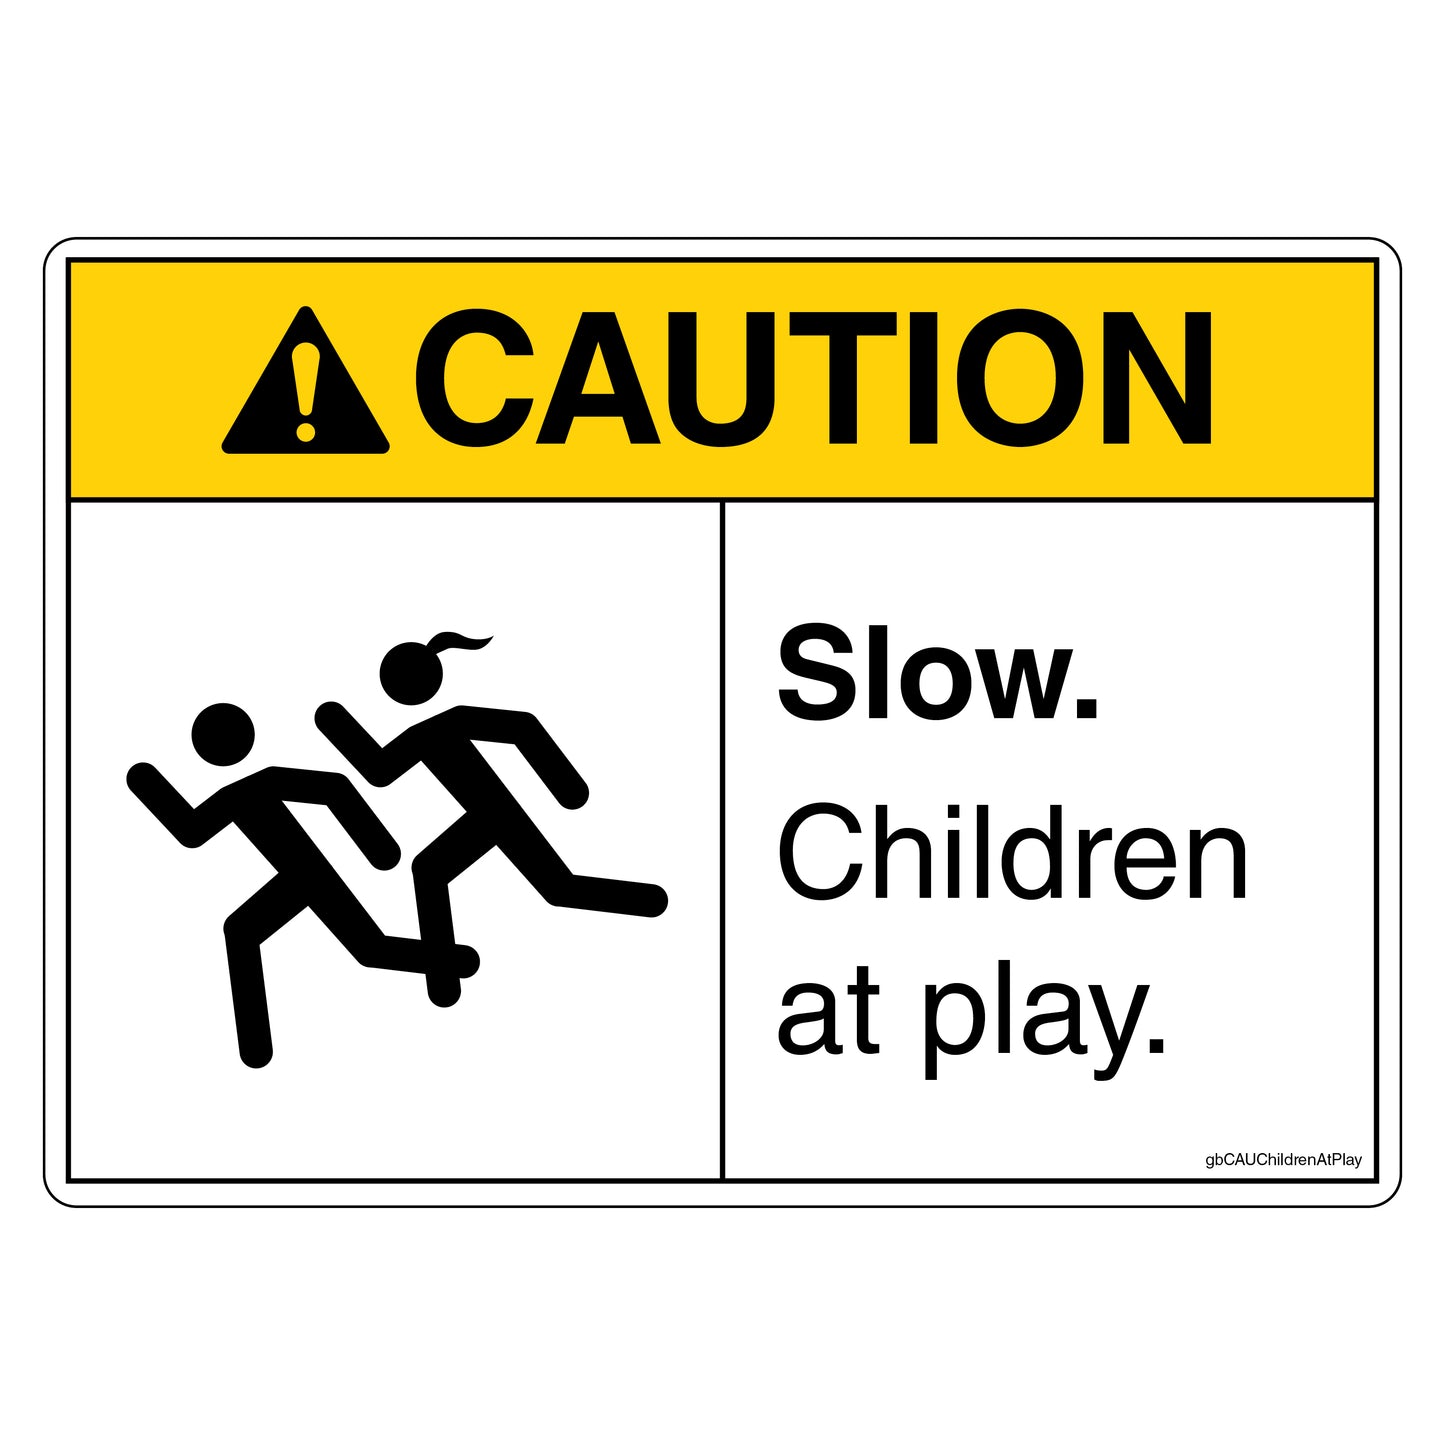 Caution Slow Children At Play Decal. 